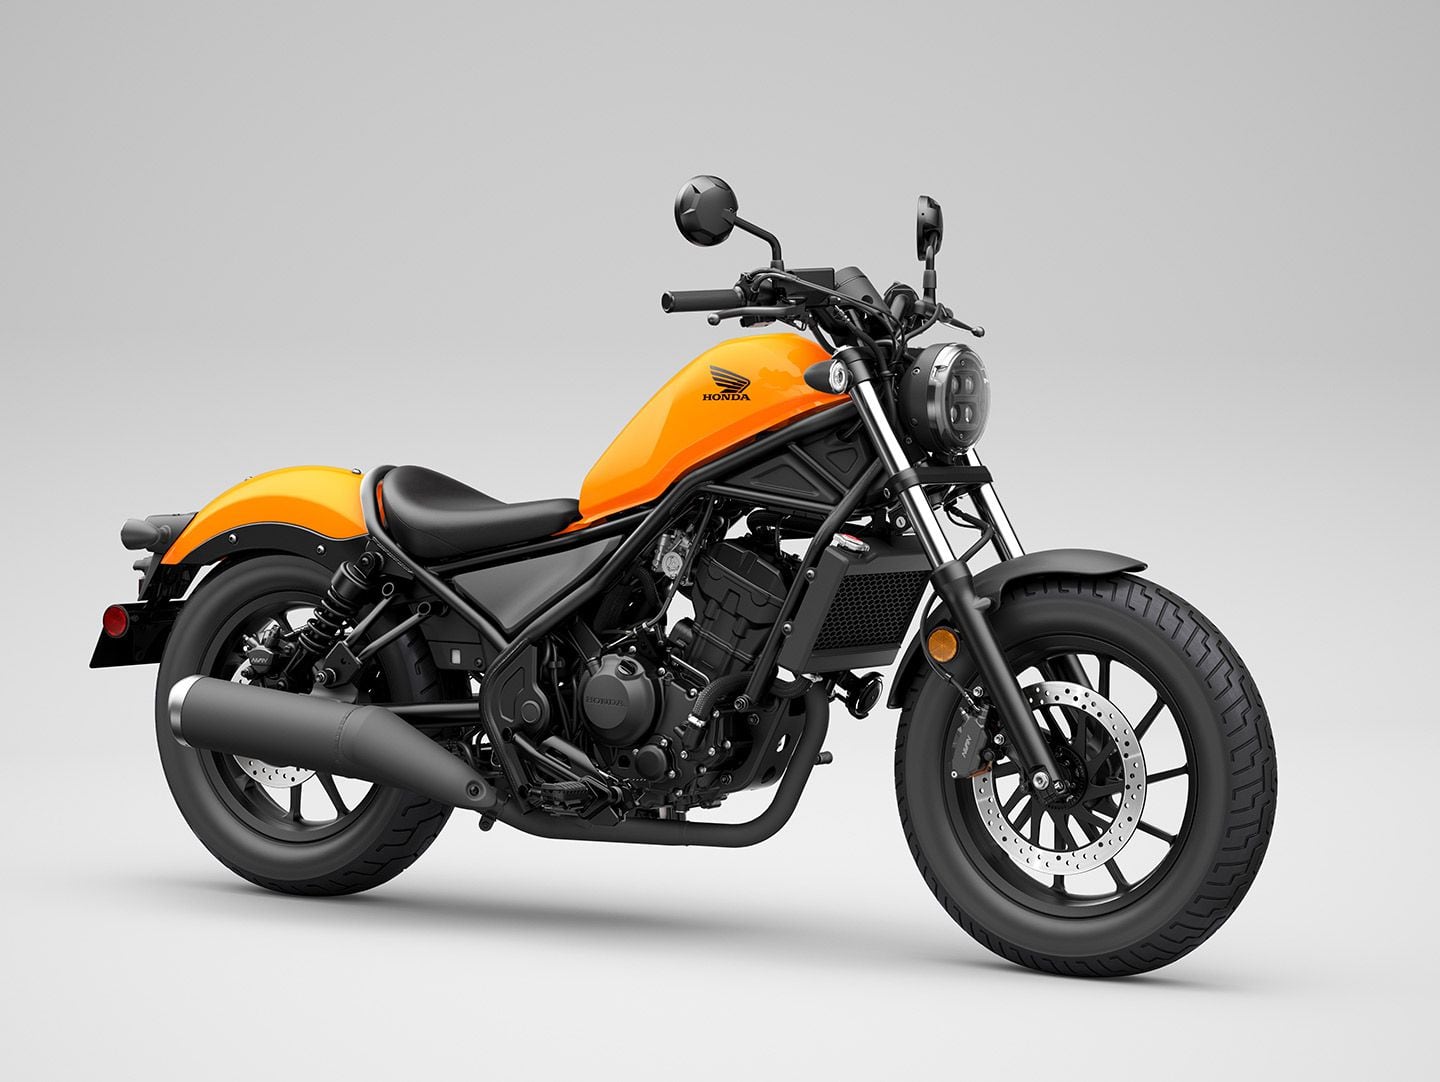 The Honda Rebel 300 can be had in this funky Nitric Orange color this year.